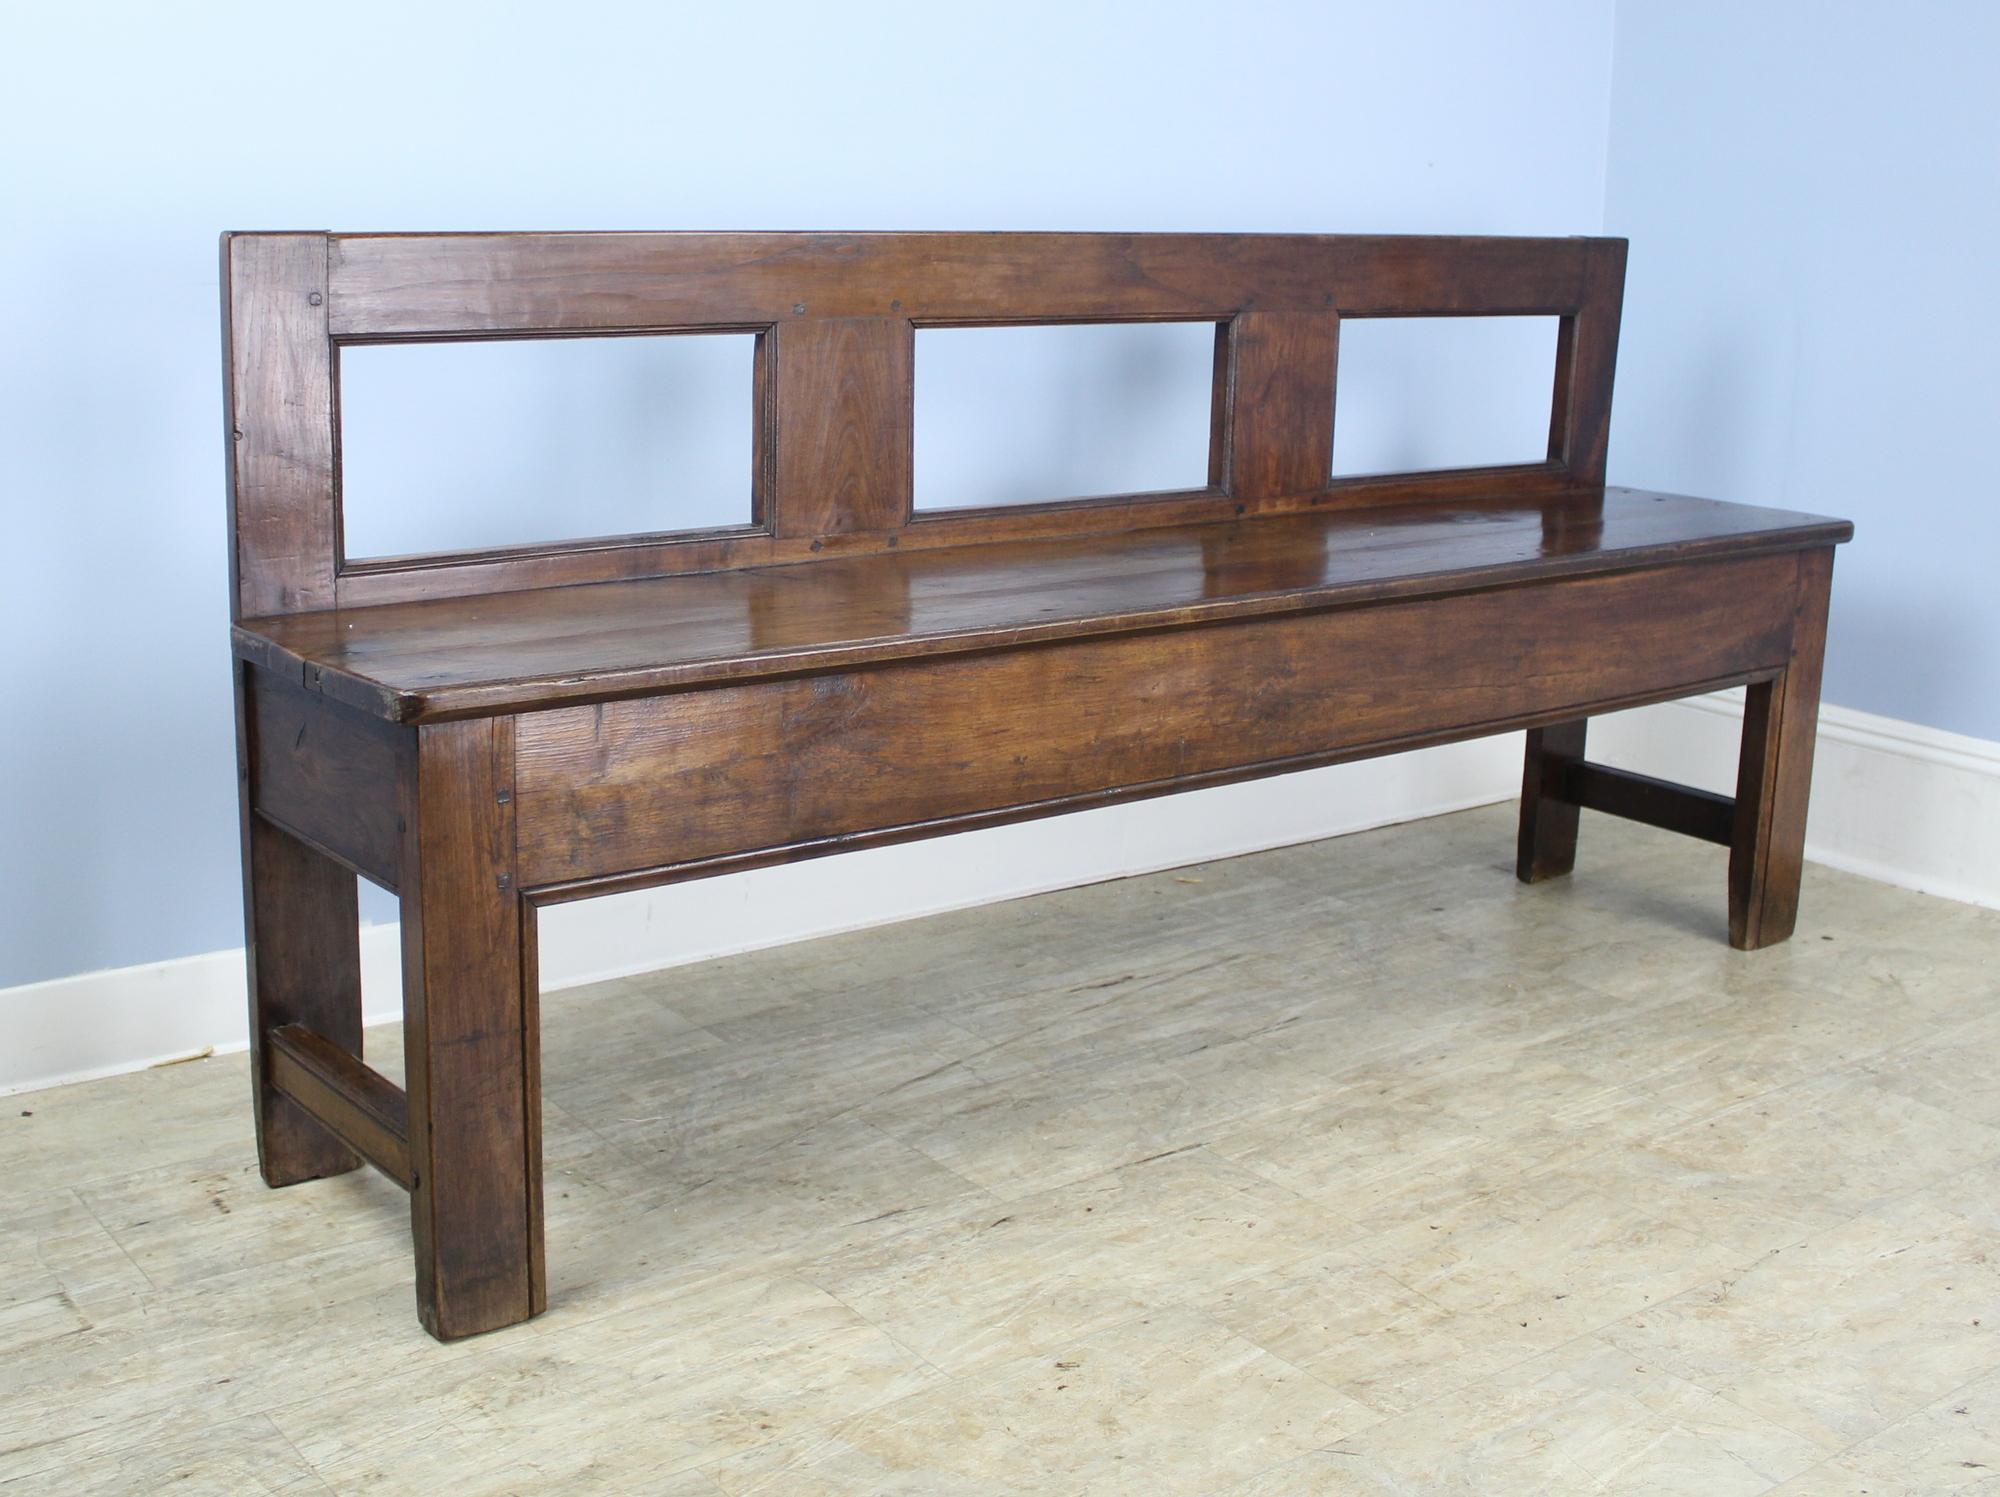 A solid handsome and sturdy chestnut bench with good depth and seat height. The wood glows with good color and patina. A simple silhouette to complement any decor. This would be right at the end of a bed or in a well appointed hall or mudroom.